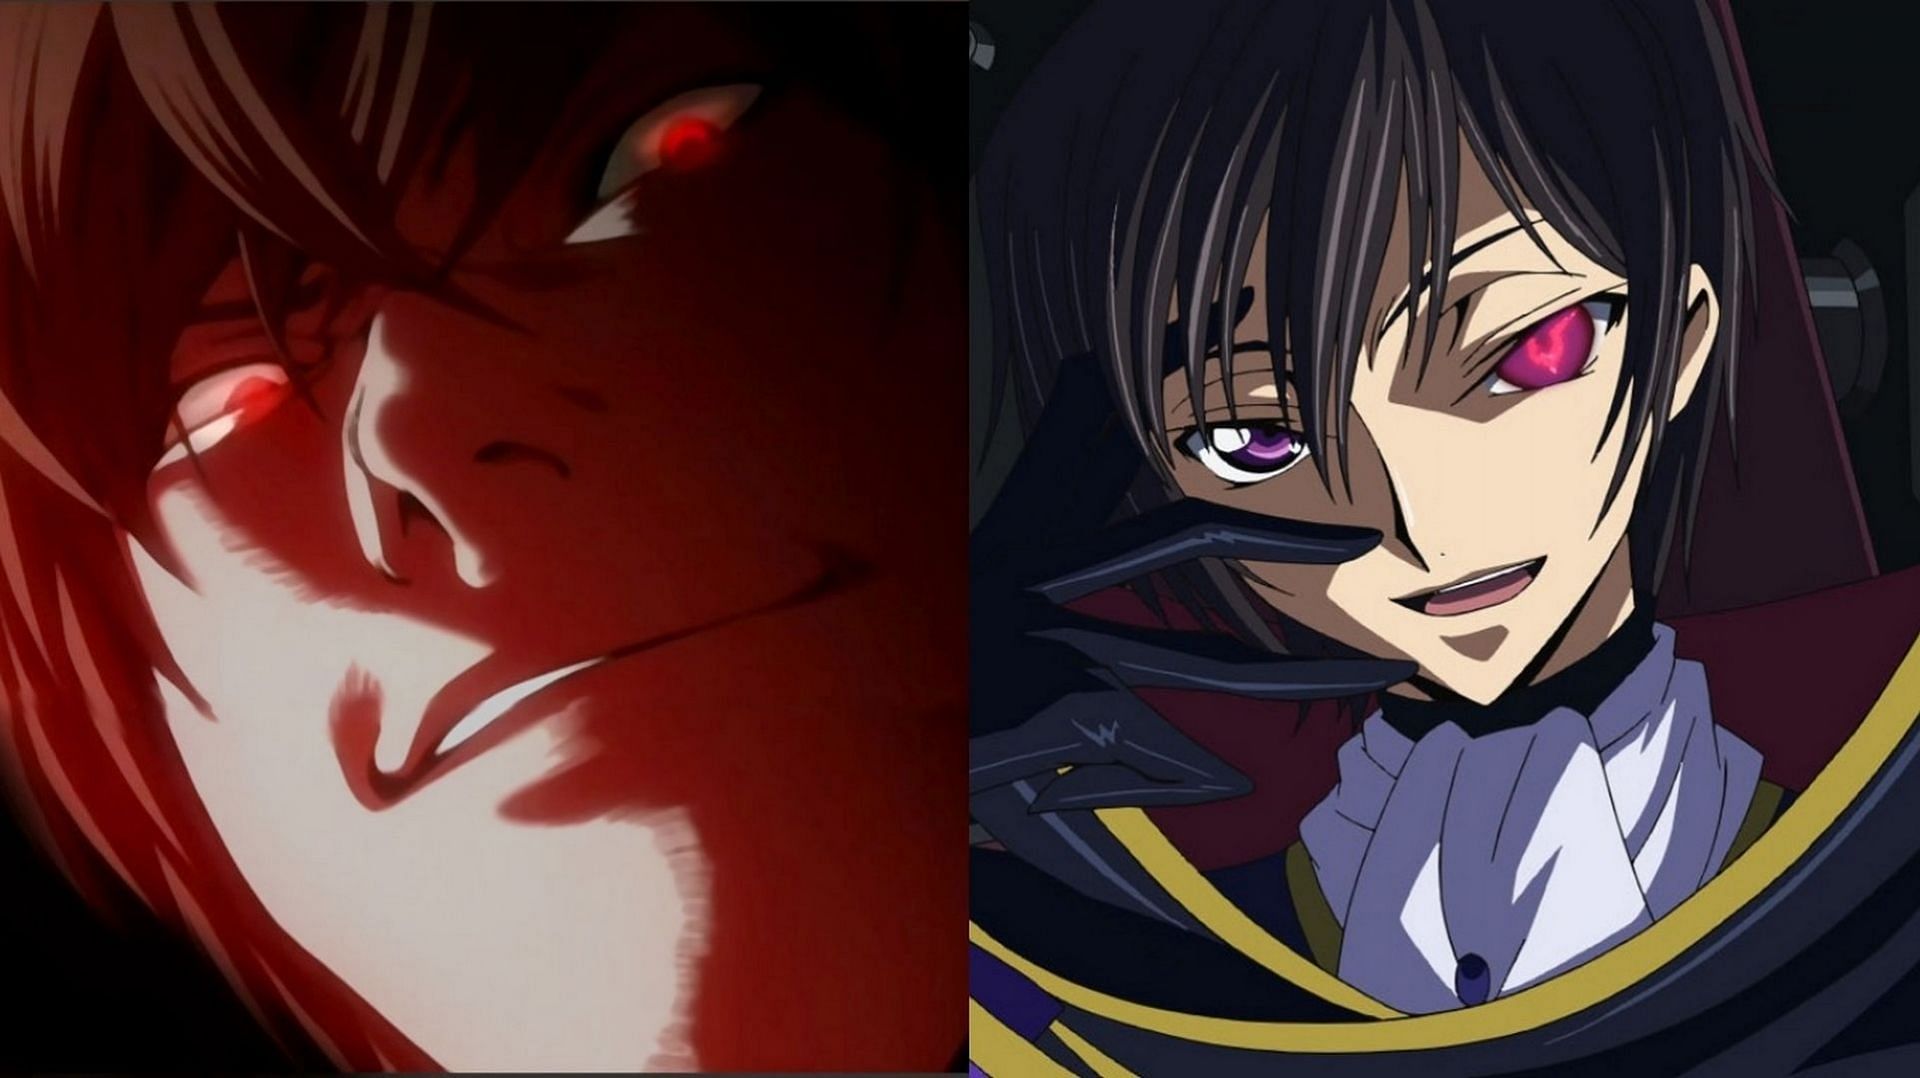 Light Yagami from Death Note and Lelouch vi Britannia from Code Geass (Image via Sportskeeda)